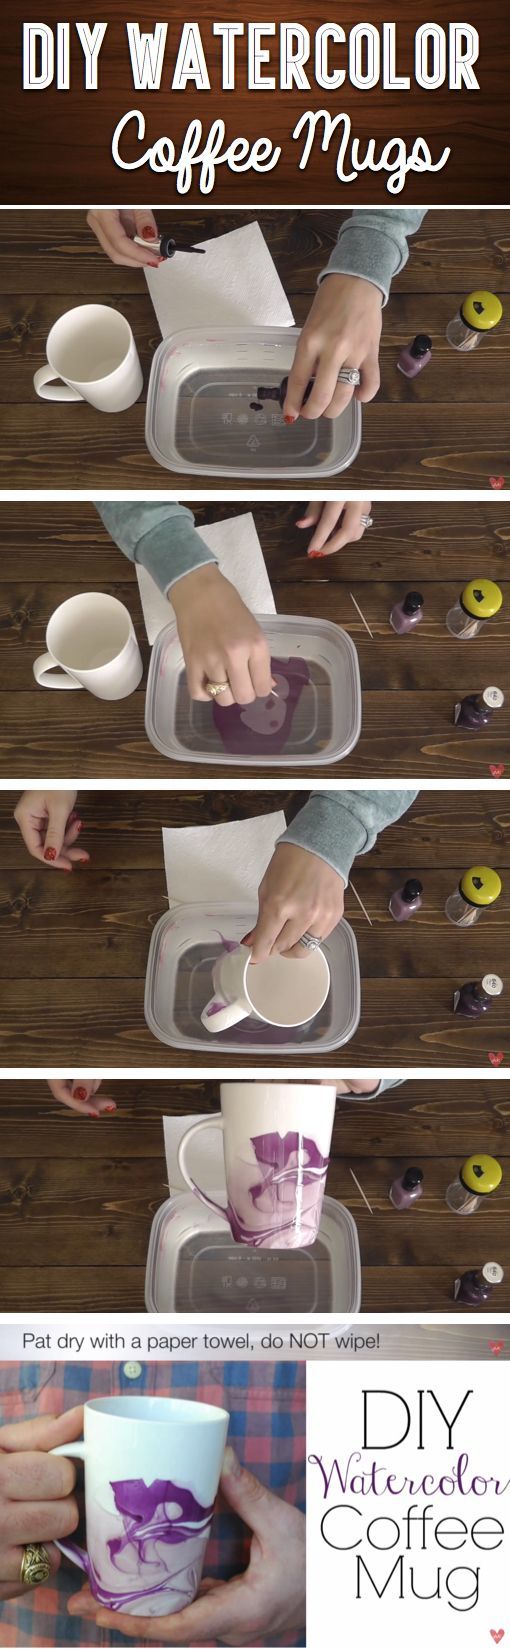 You Will Be Amazed To See What You Can Achieve With A Plain Coffee Cup And Some Nail Polish! – She Turned A Plain Mug, Nail Polish